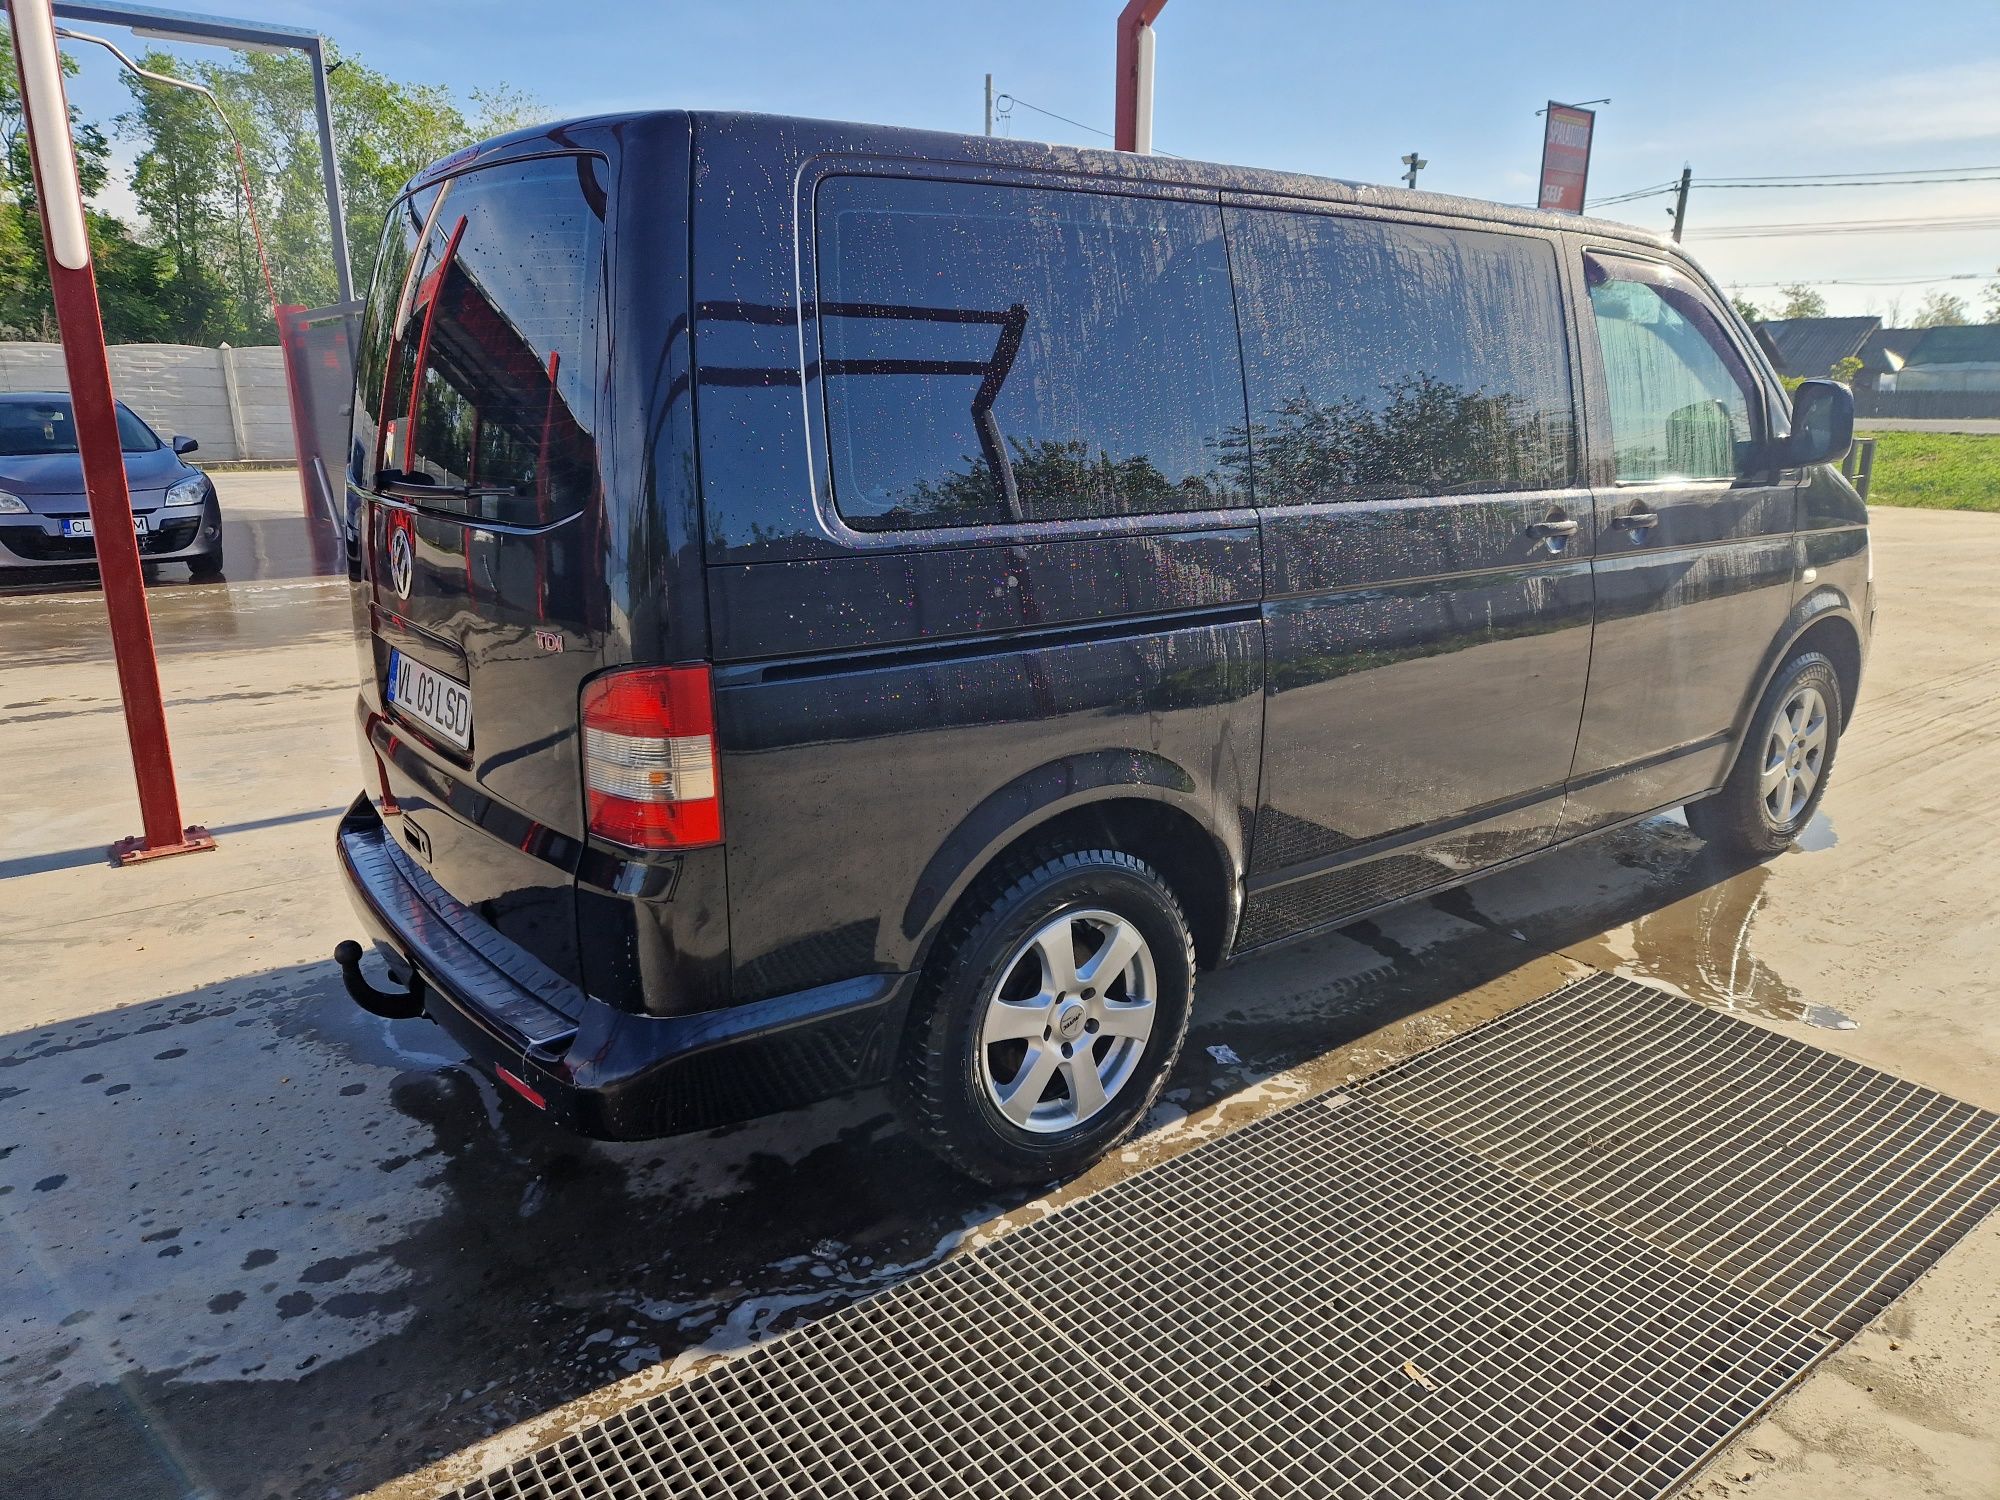 Vand VW Caravelle cu 2 usi laterale